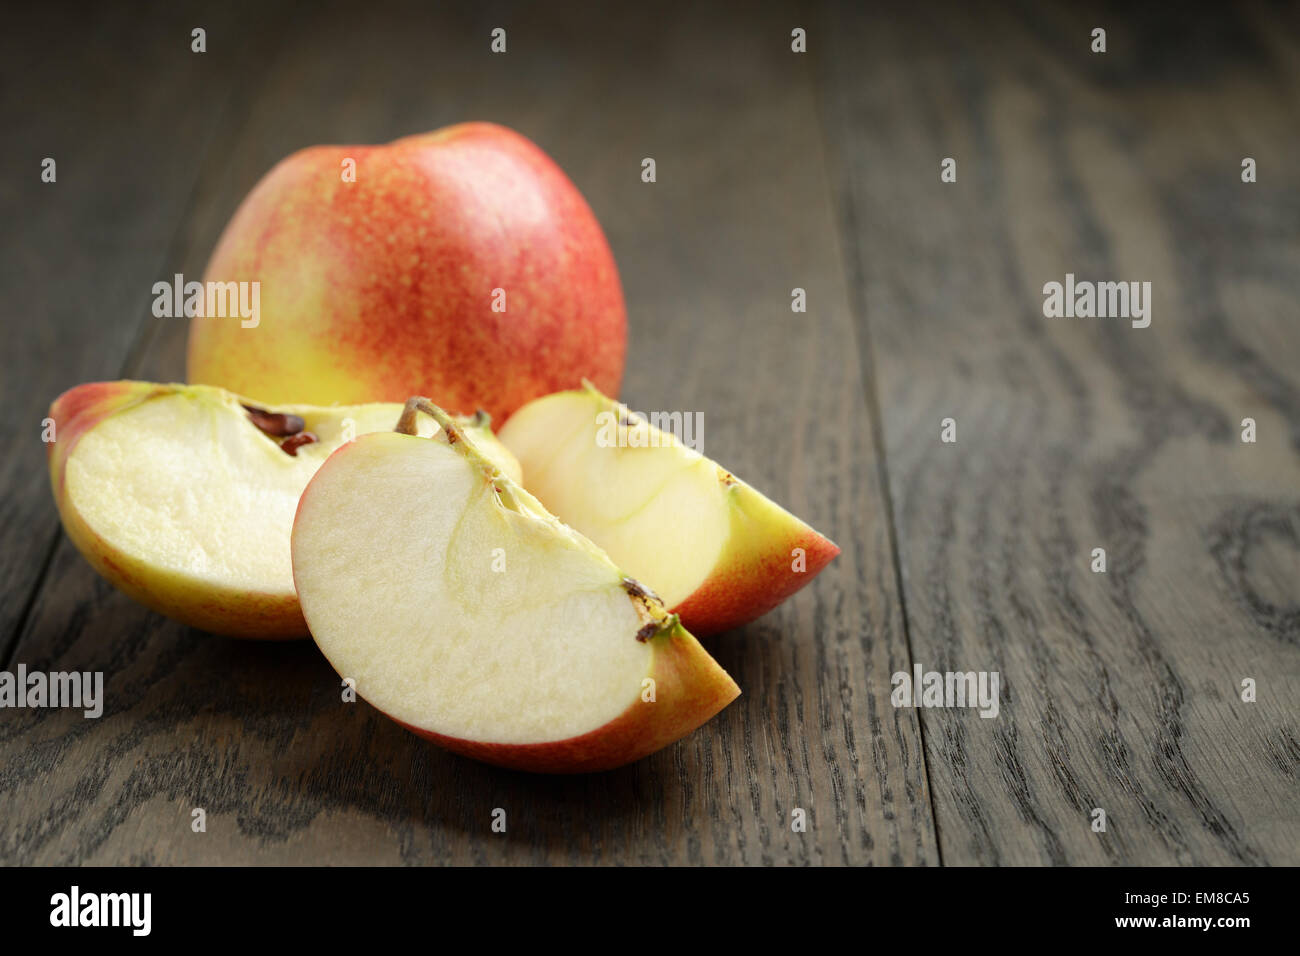 seasonal red apples sliced on wooden table Stock Photo